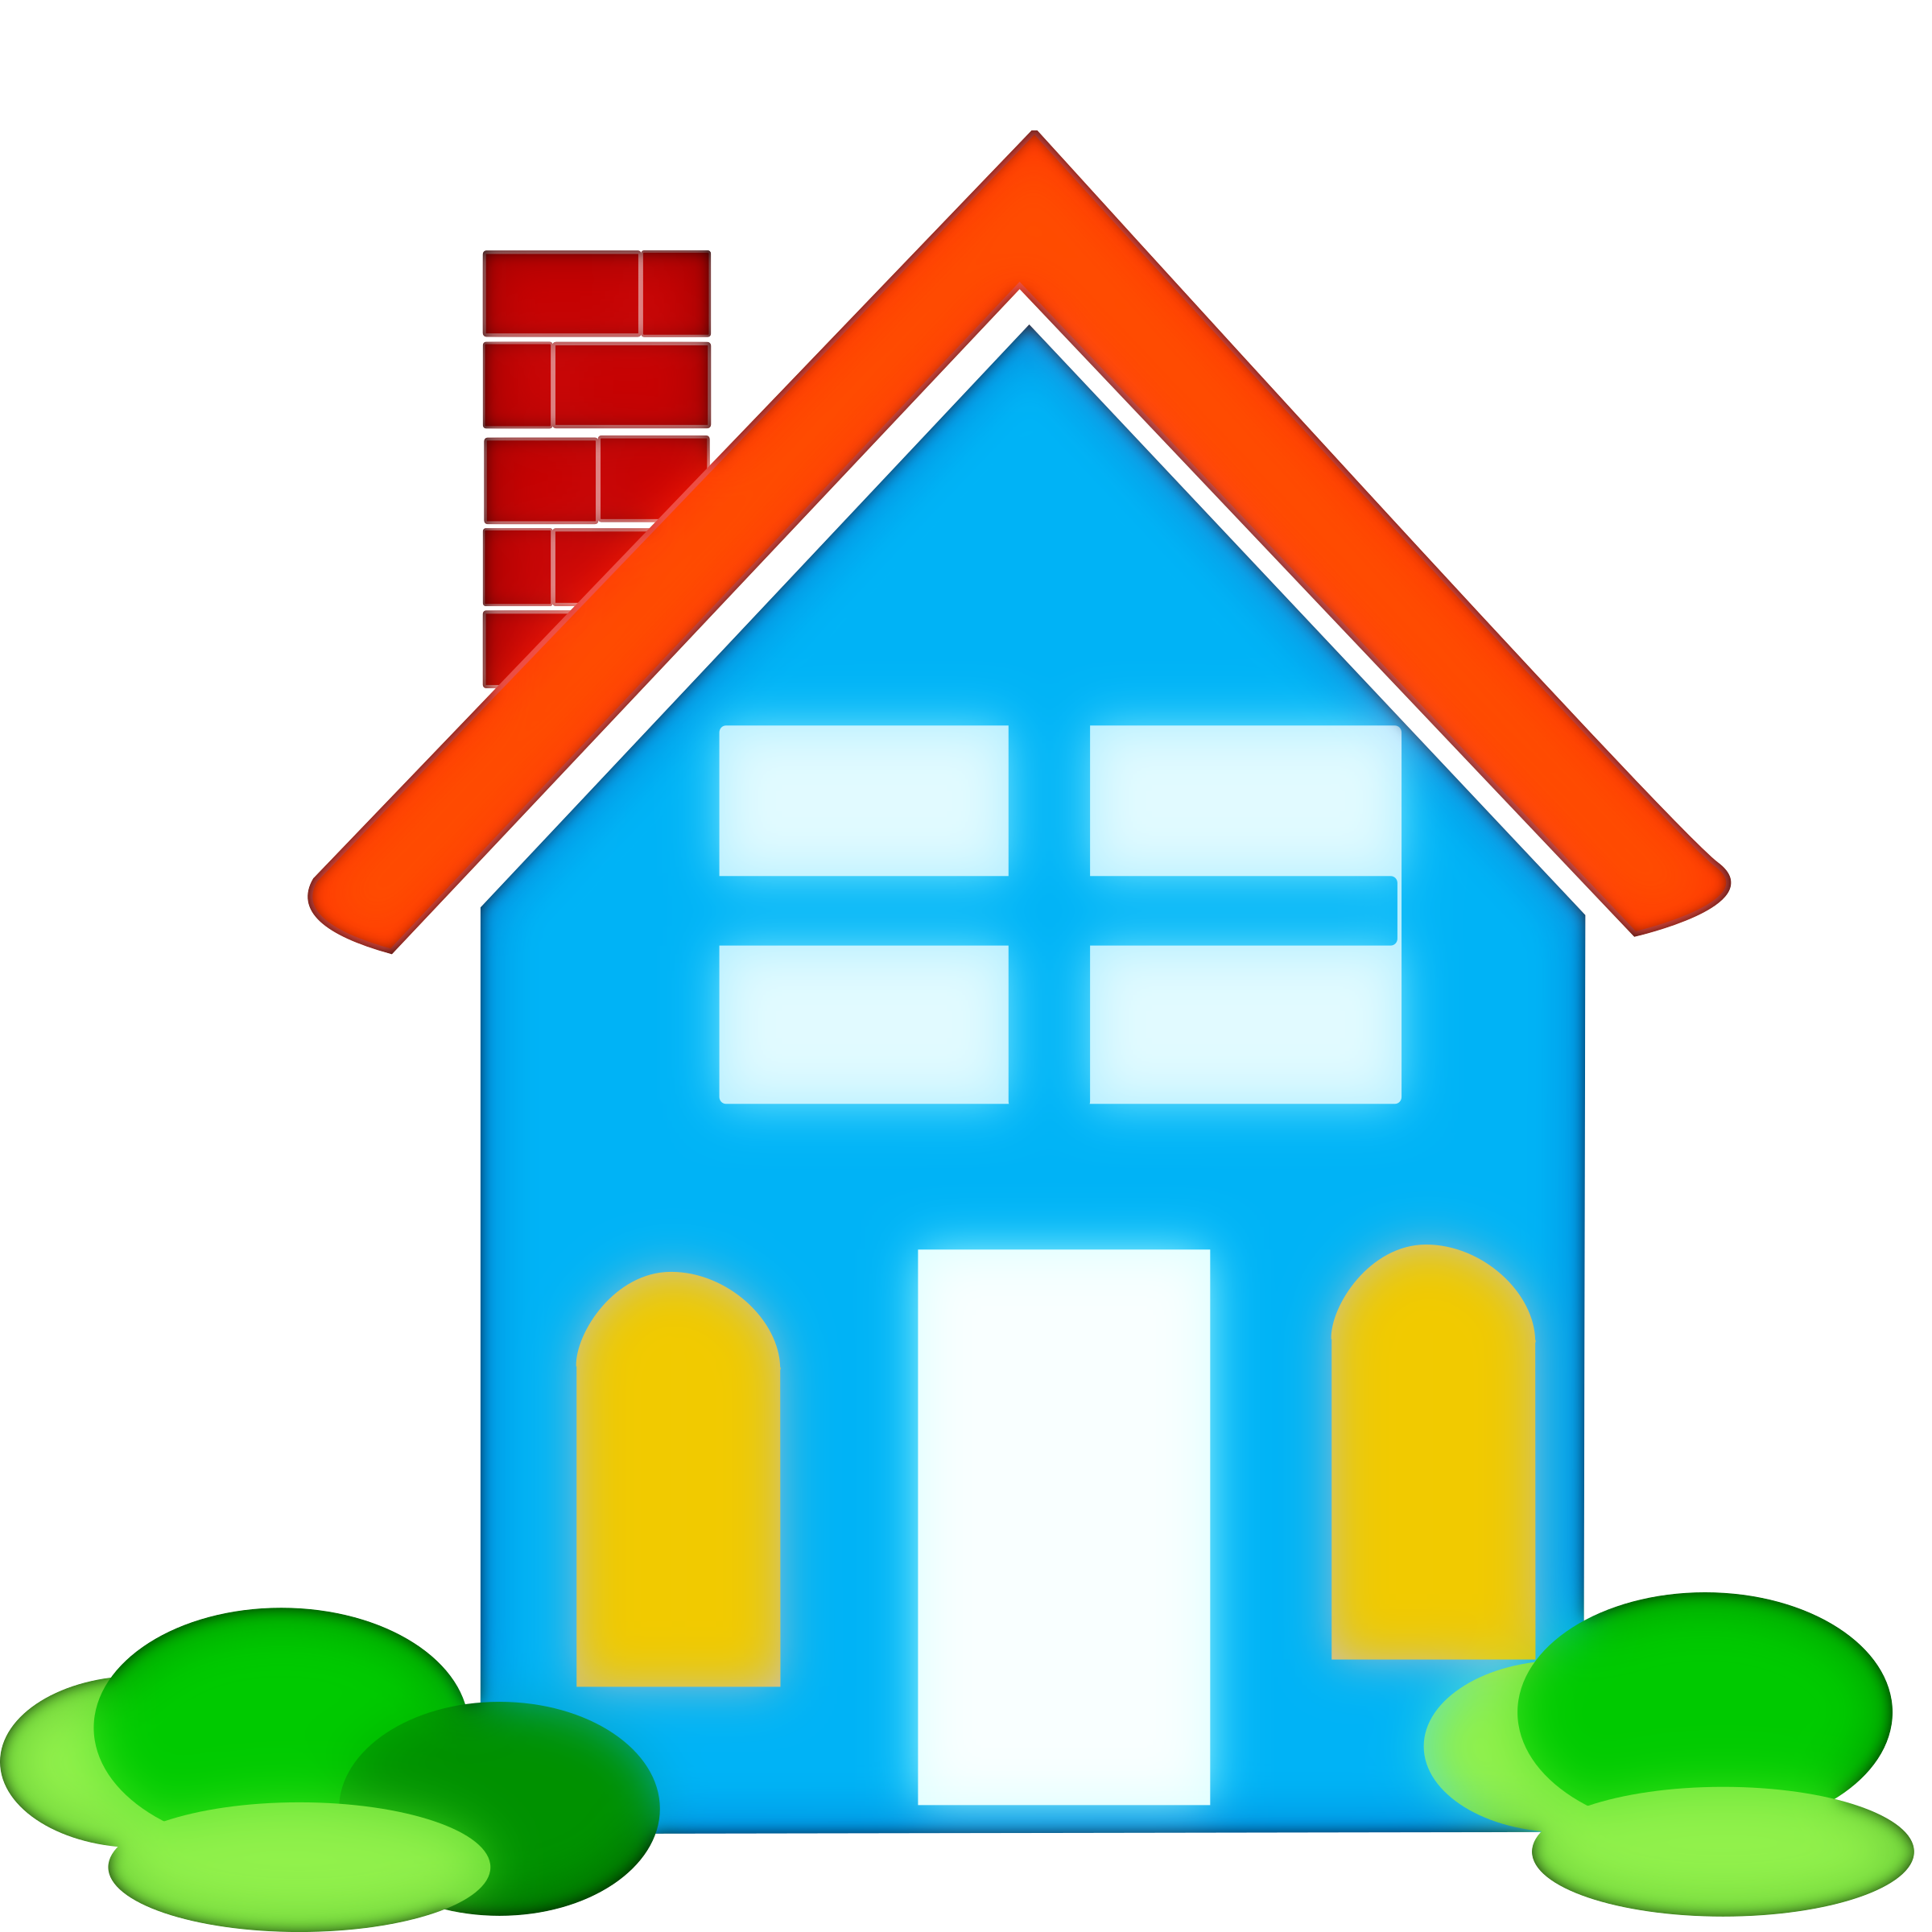 Download House Vector Art image - Free stock photo - Public Domain ...